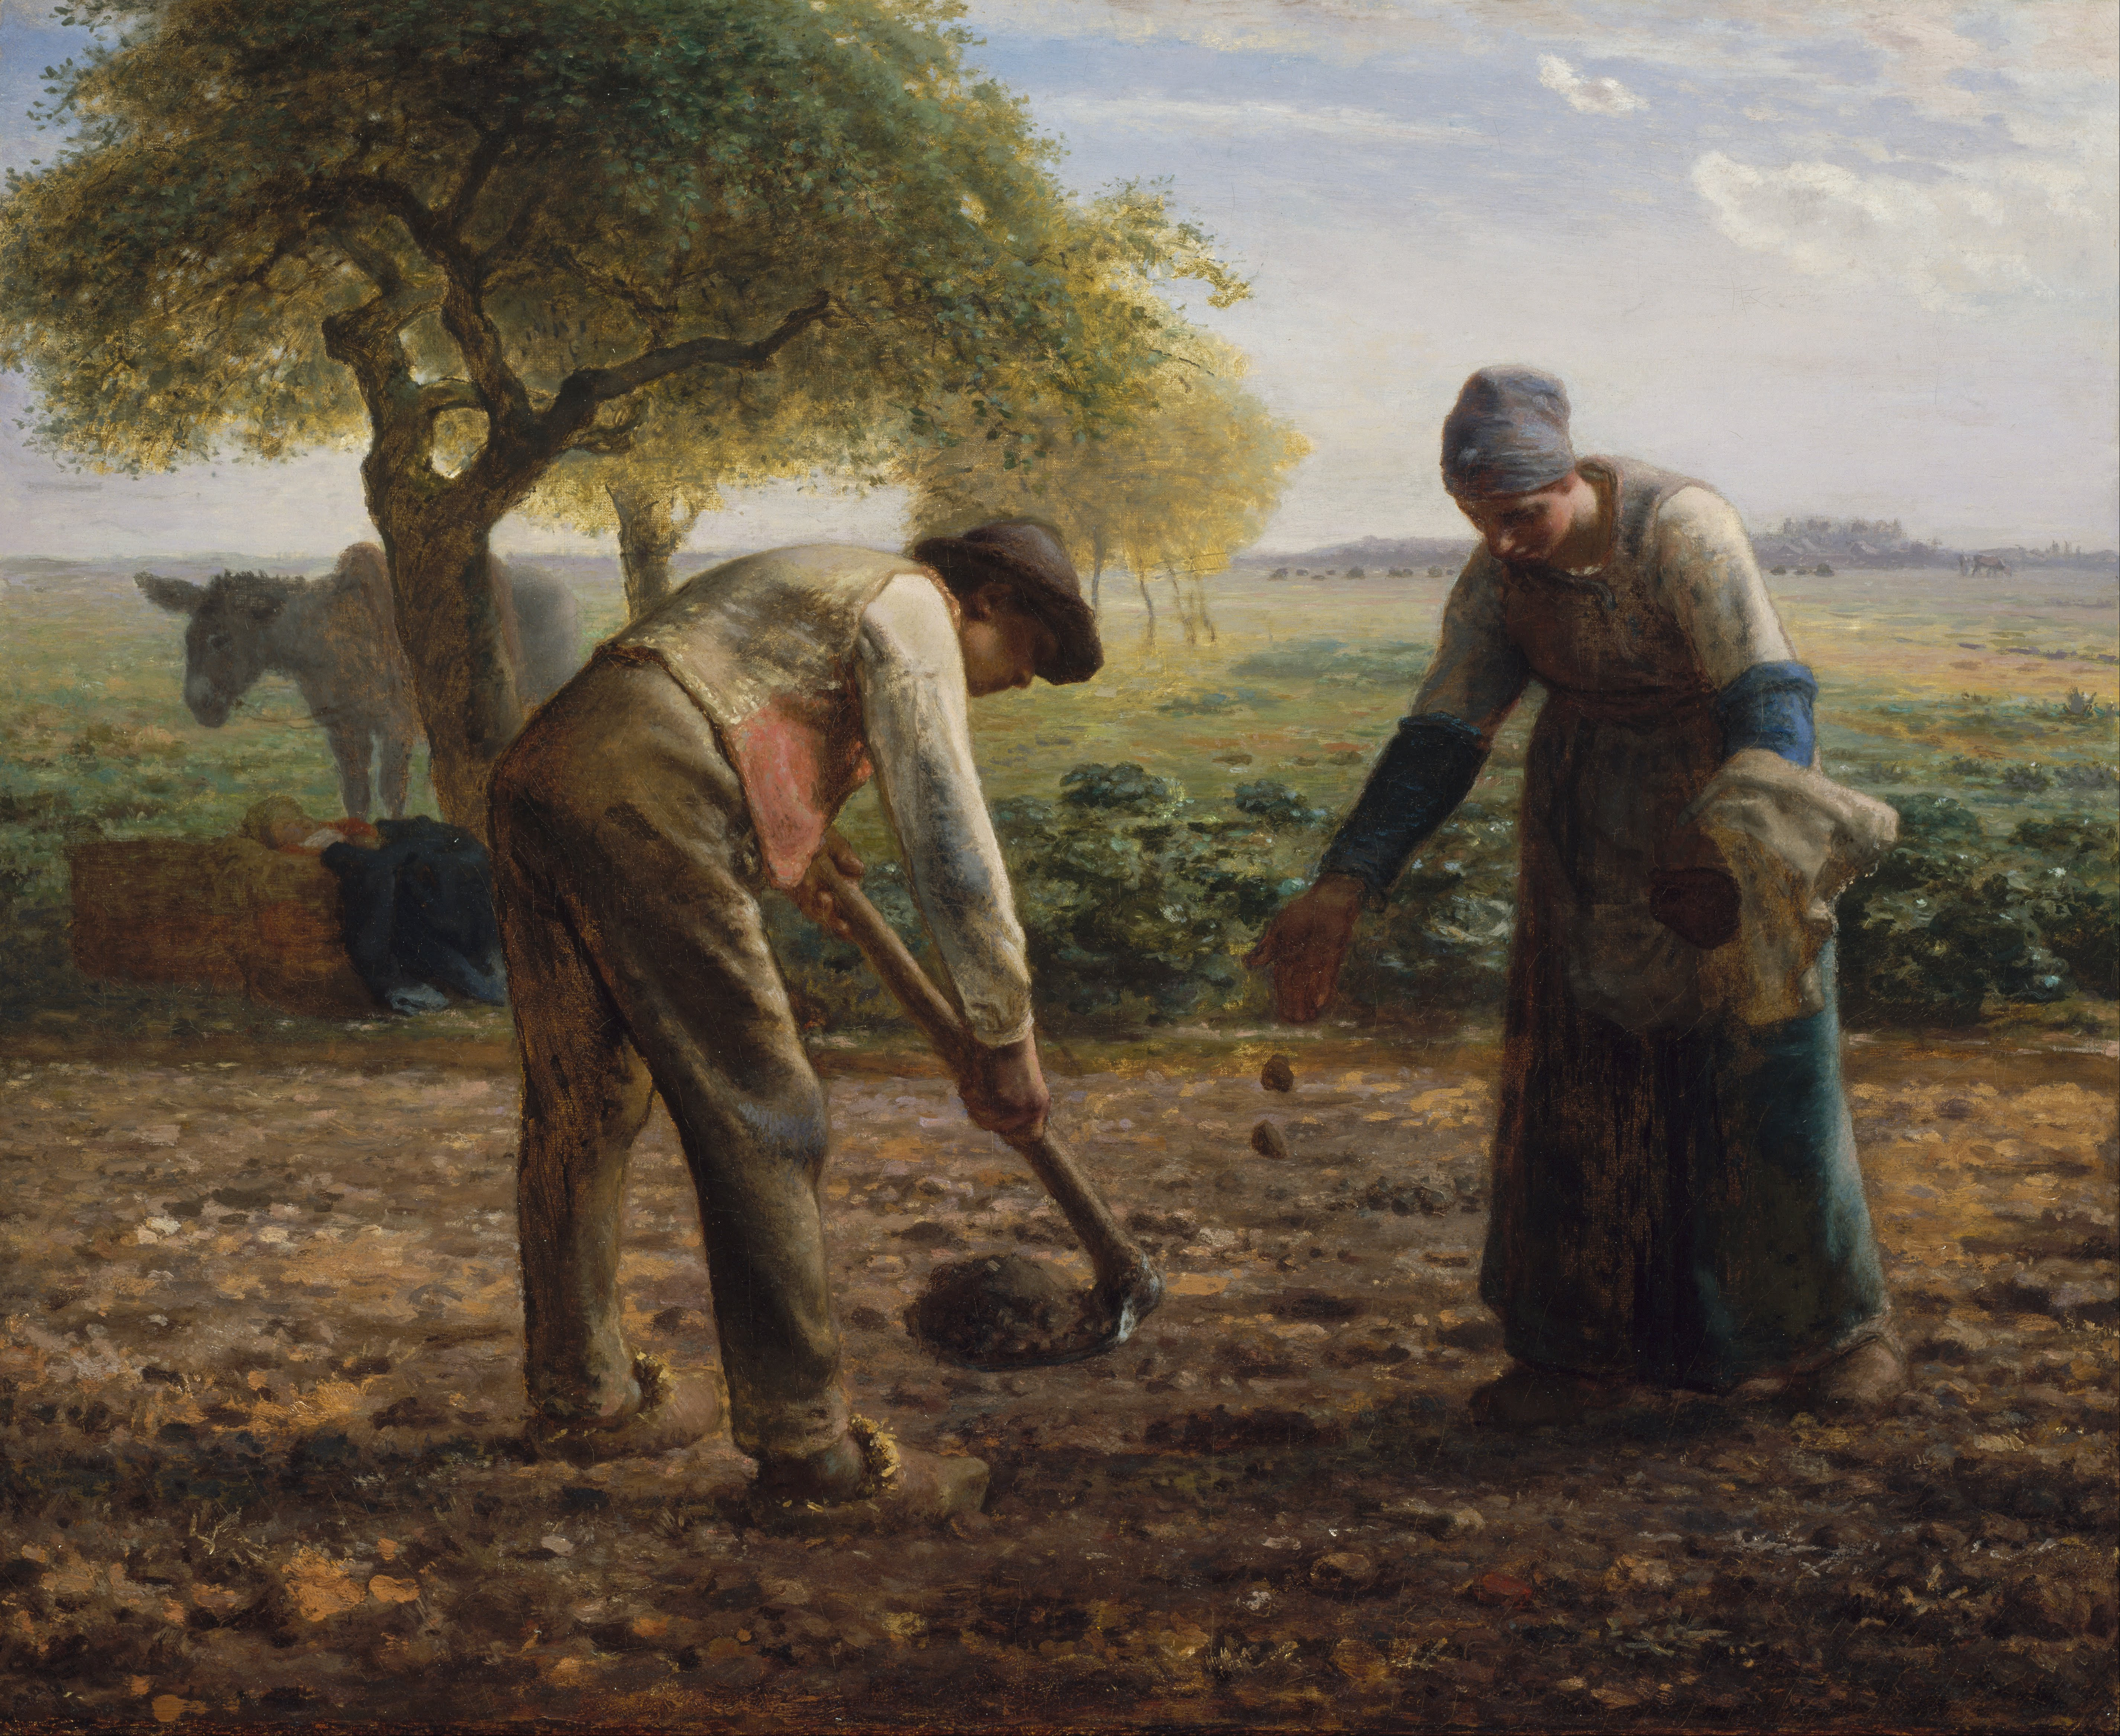 A man and women planting potatoes 1861, by Jean Francois Millet